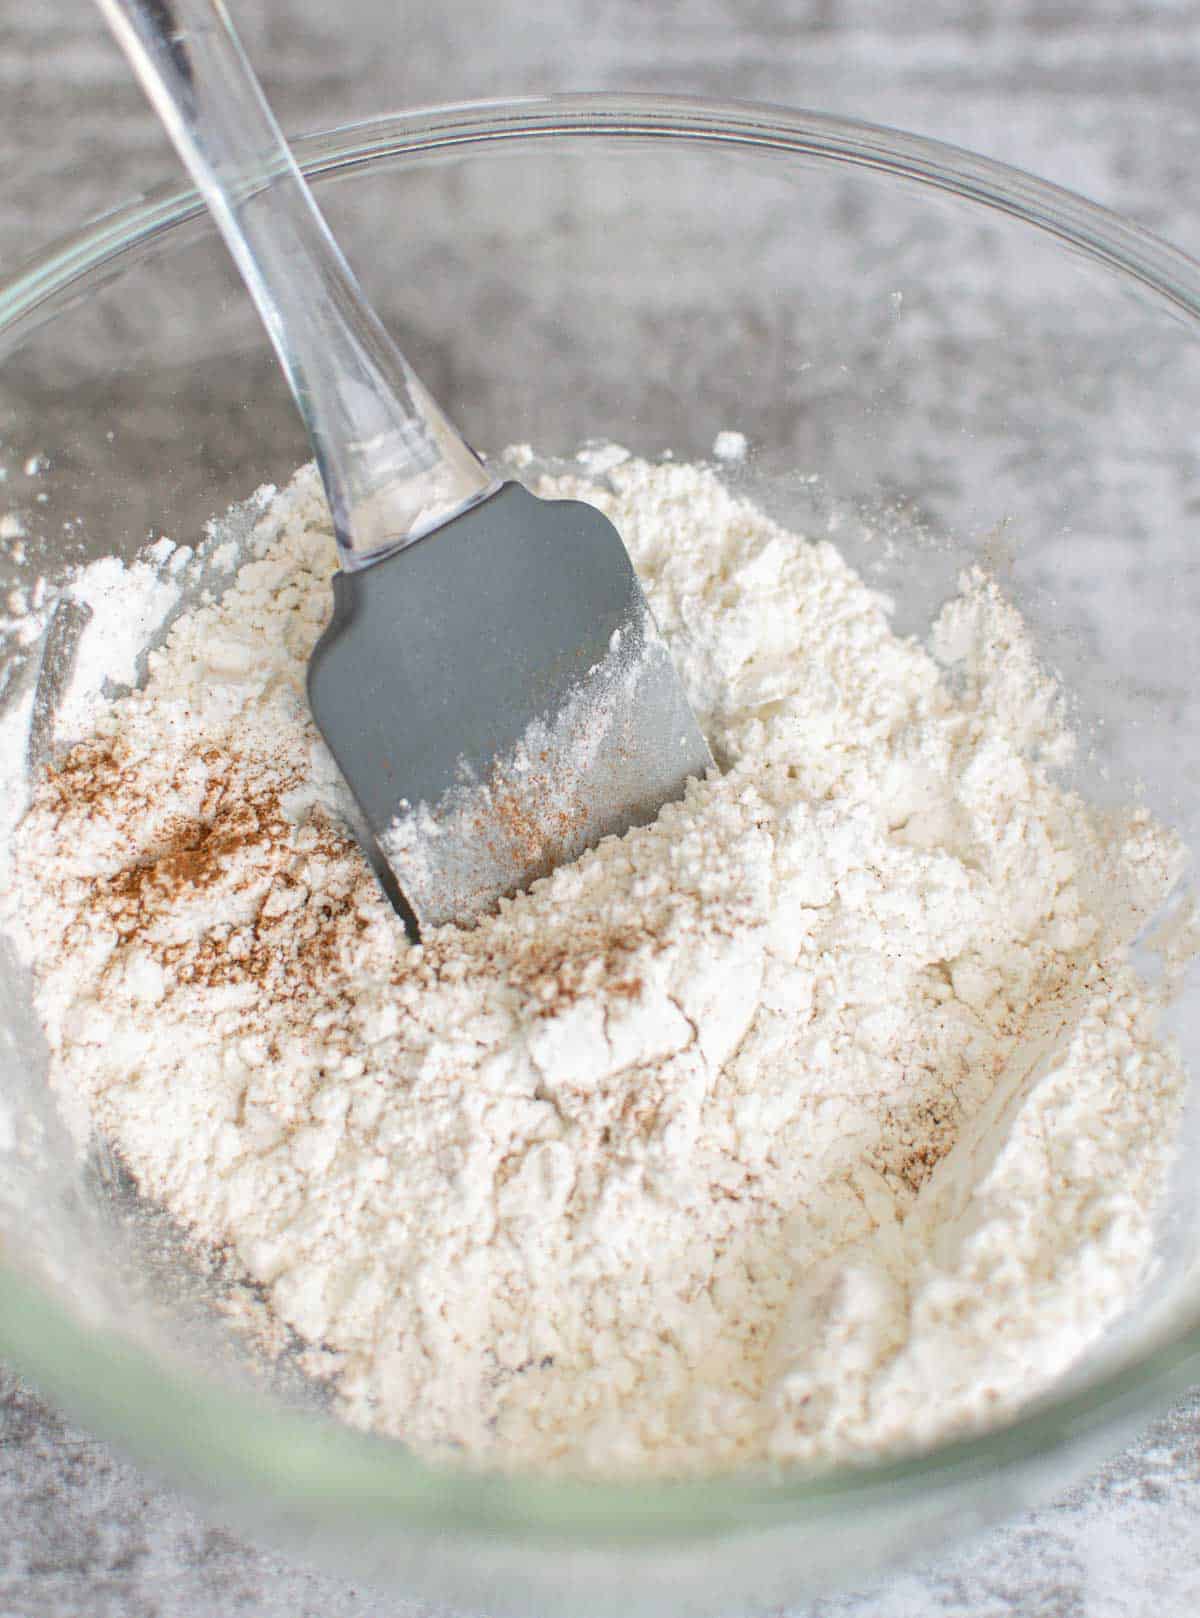 Gluten-free flour mixed with cinnamon in a bowl.